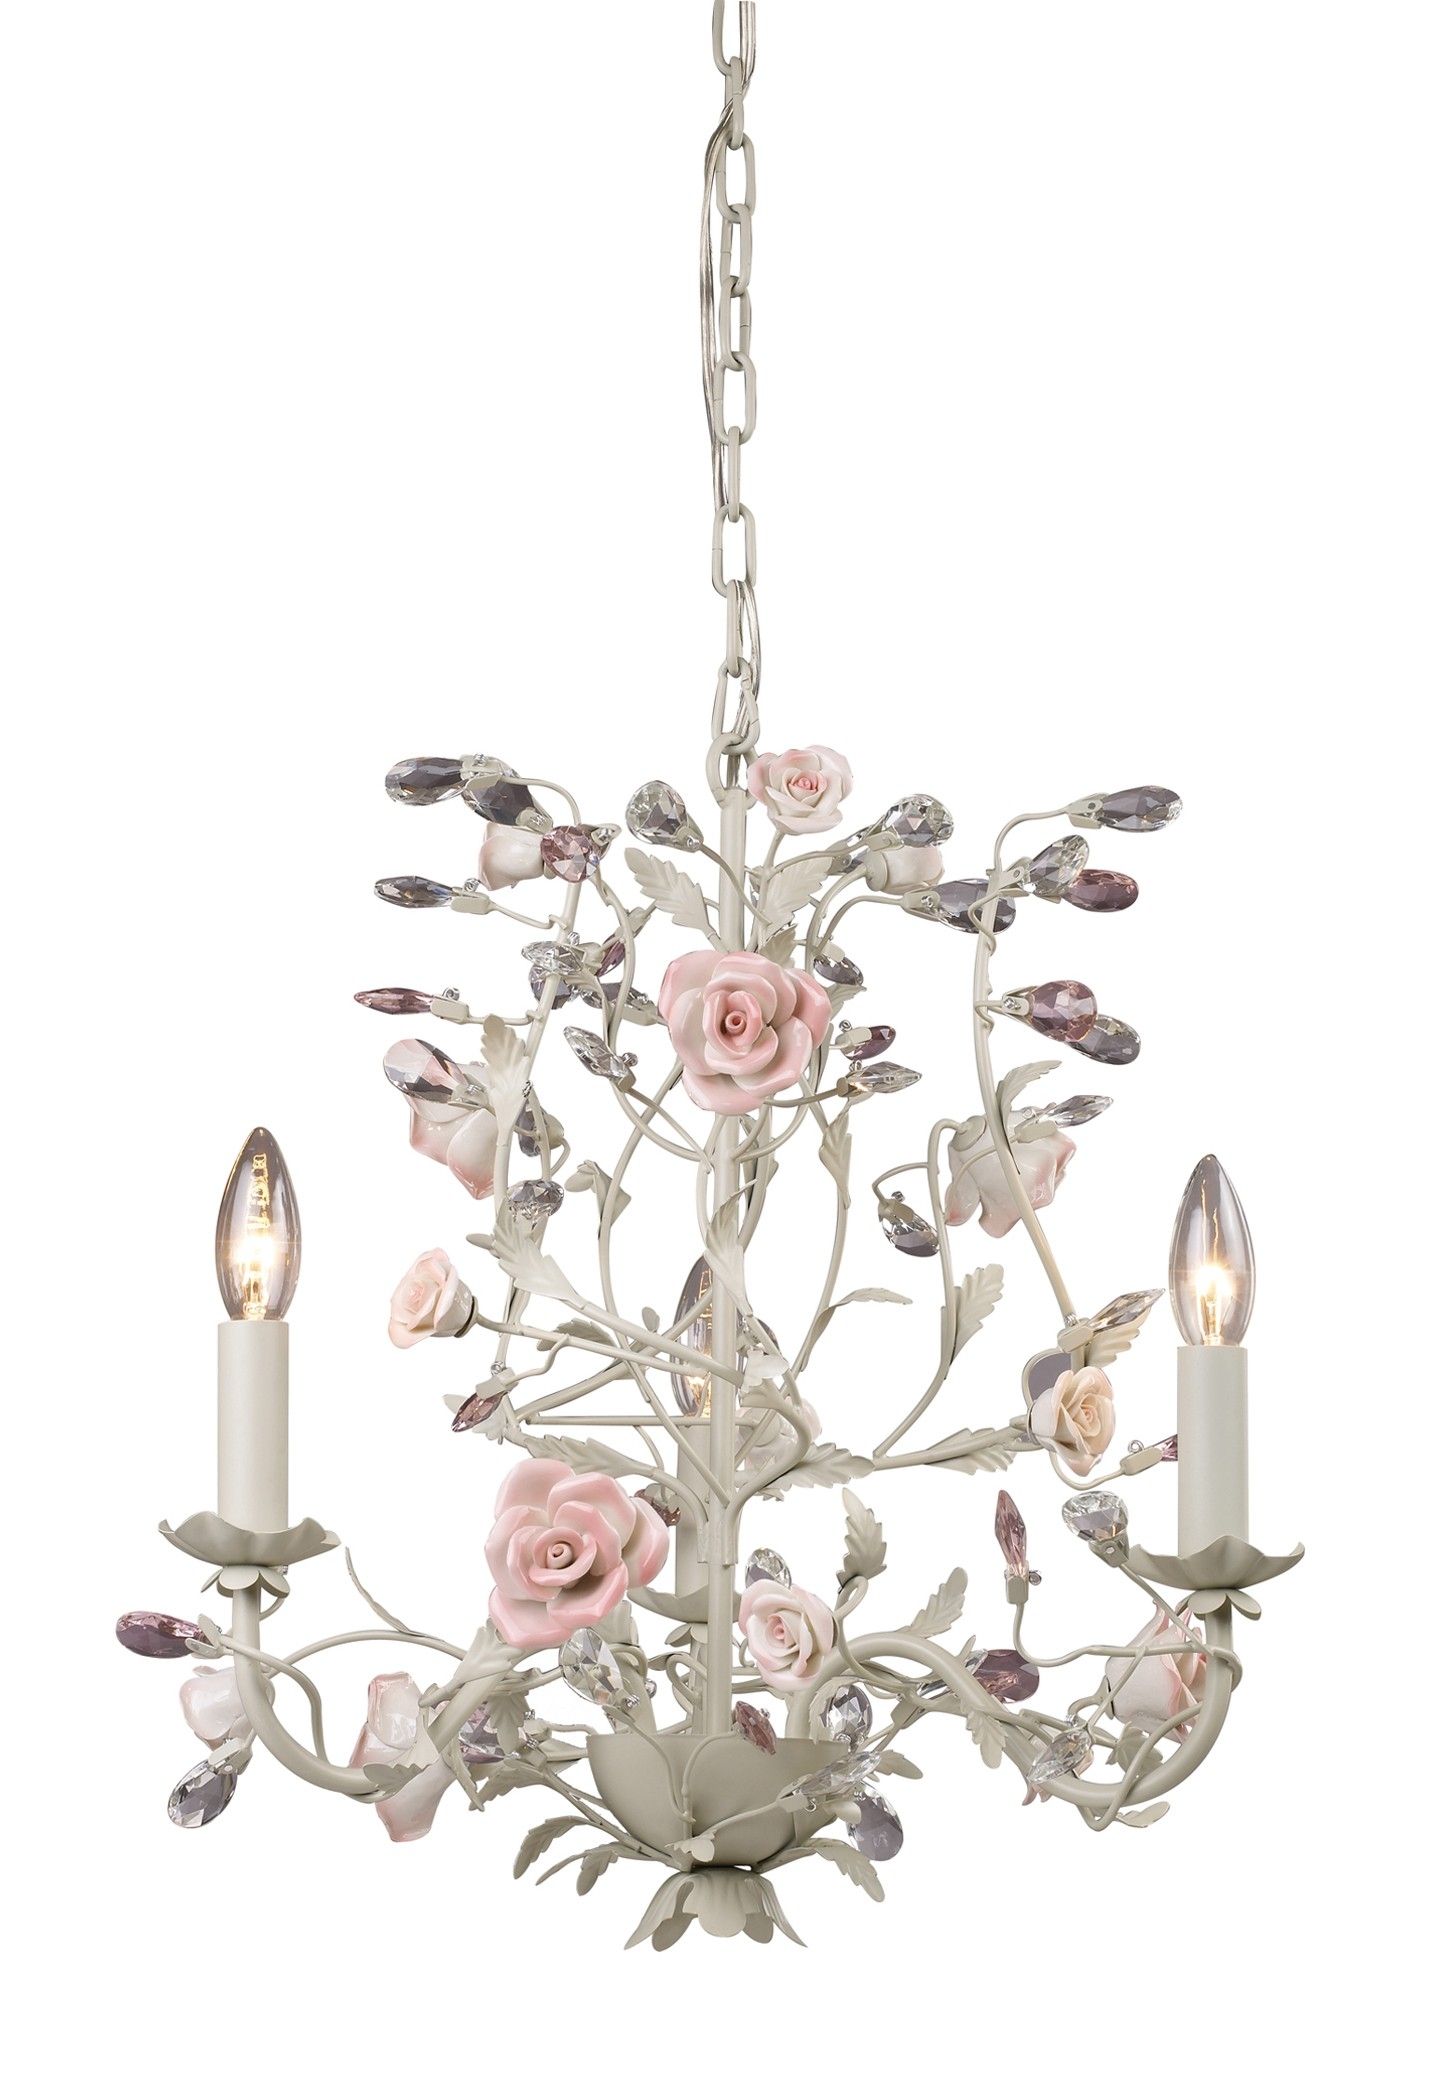 Light Flower Chandelier Would Love This For My Office Throughout Large Cream Chandelier (View 5 of 12)